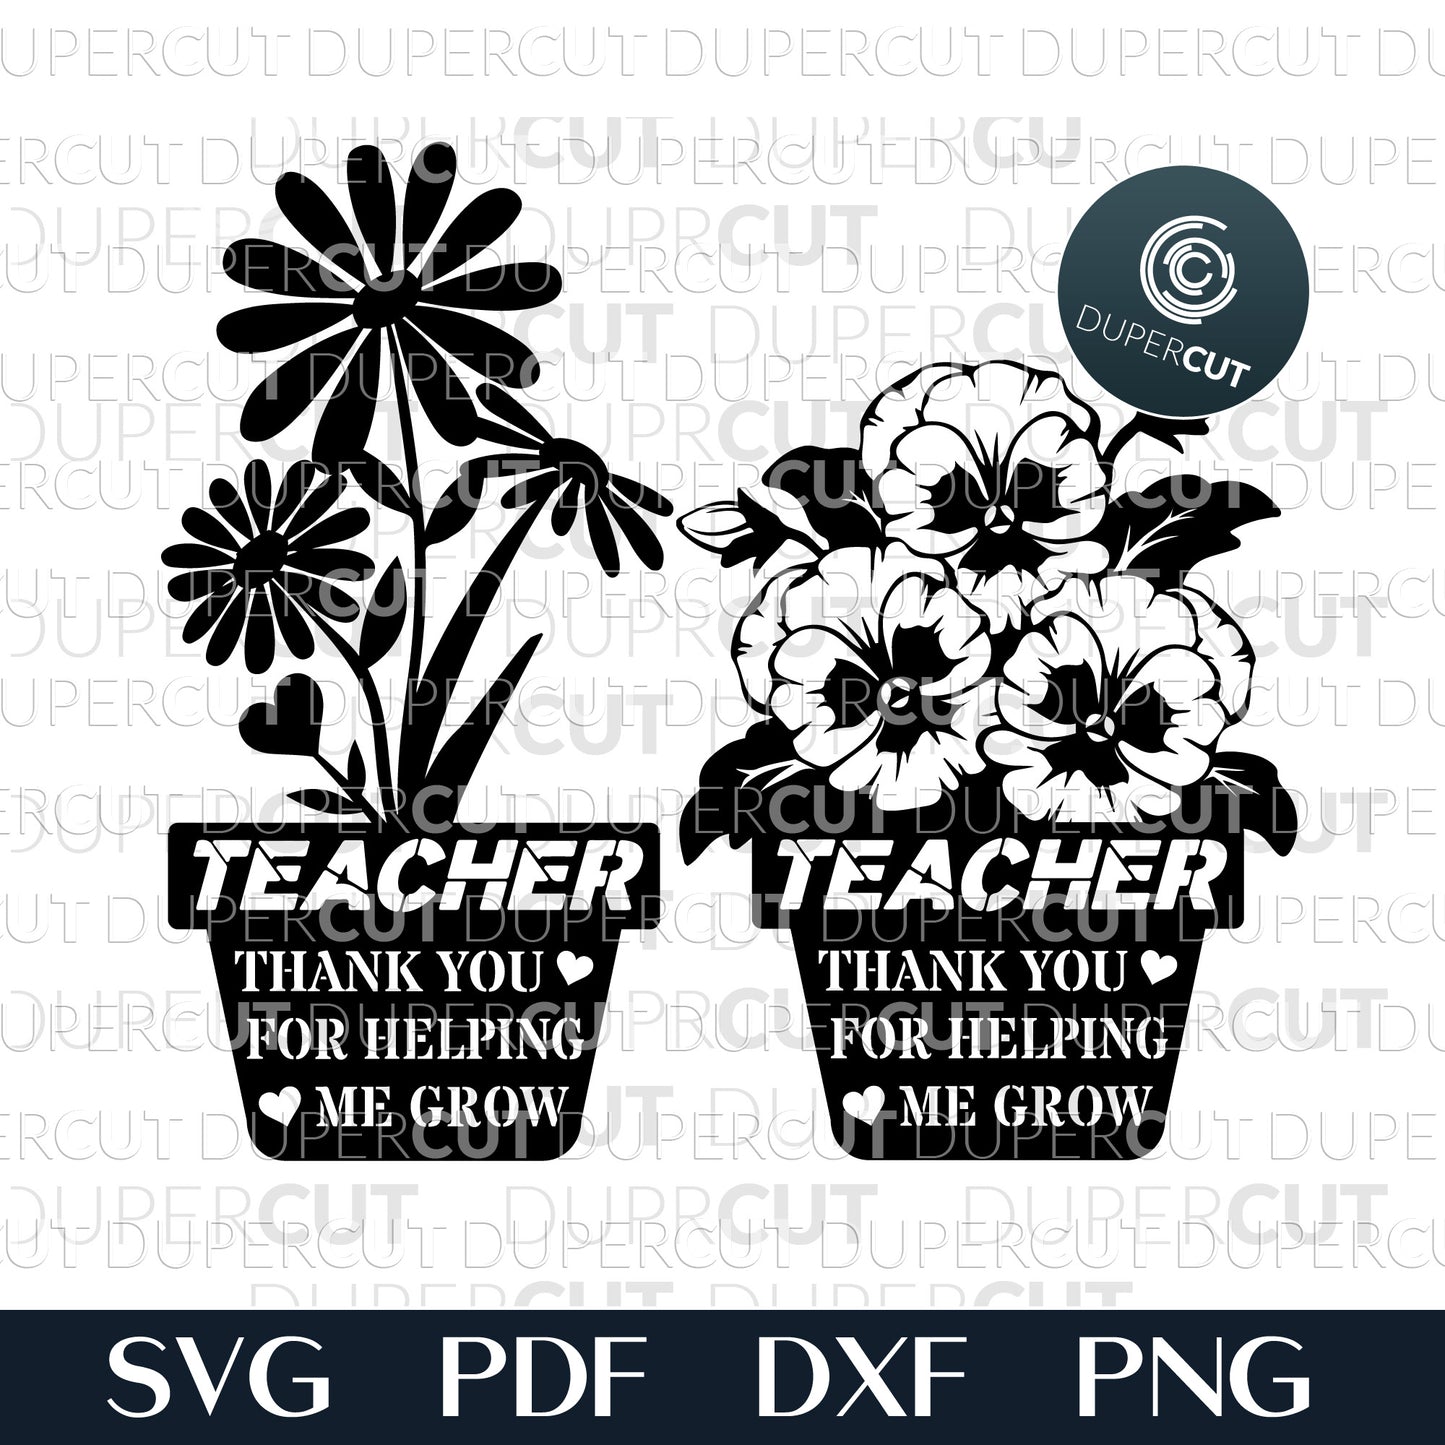 DIY gift for teacher, flower pot, cake topper template - SVG DXF PNG files for Cricut, Glowforge, Silhouette Cameo, CNC Machines